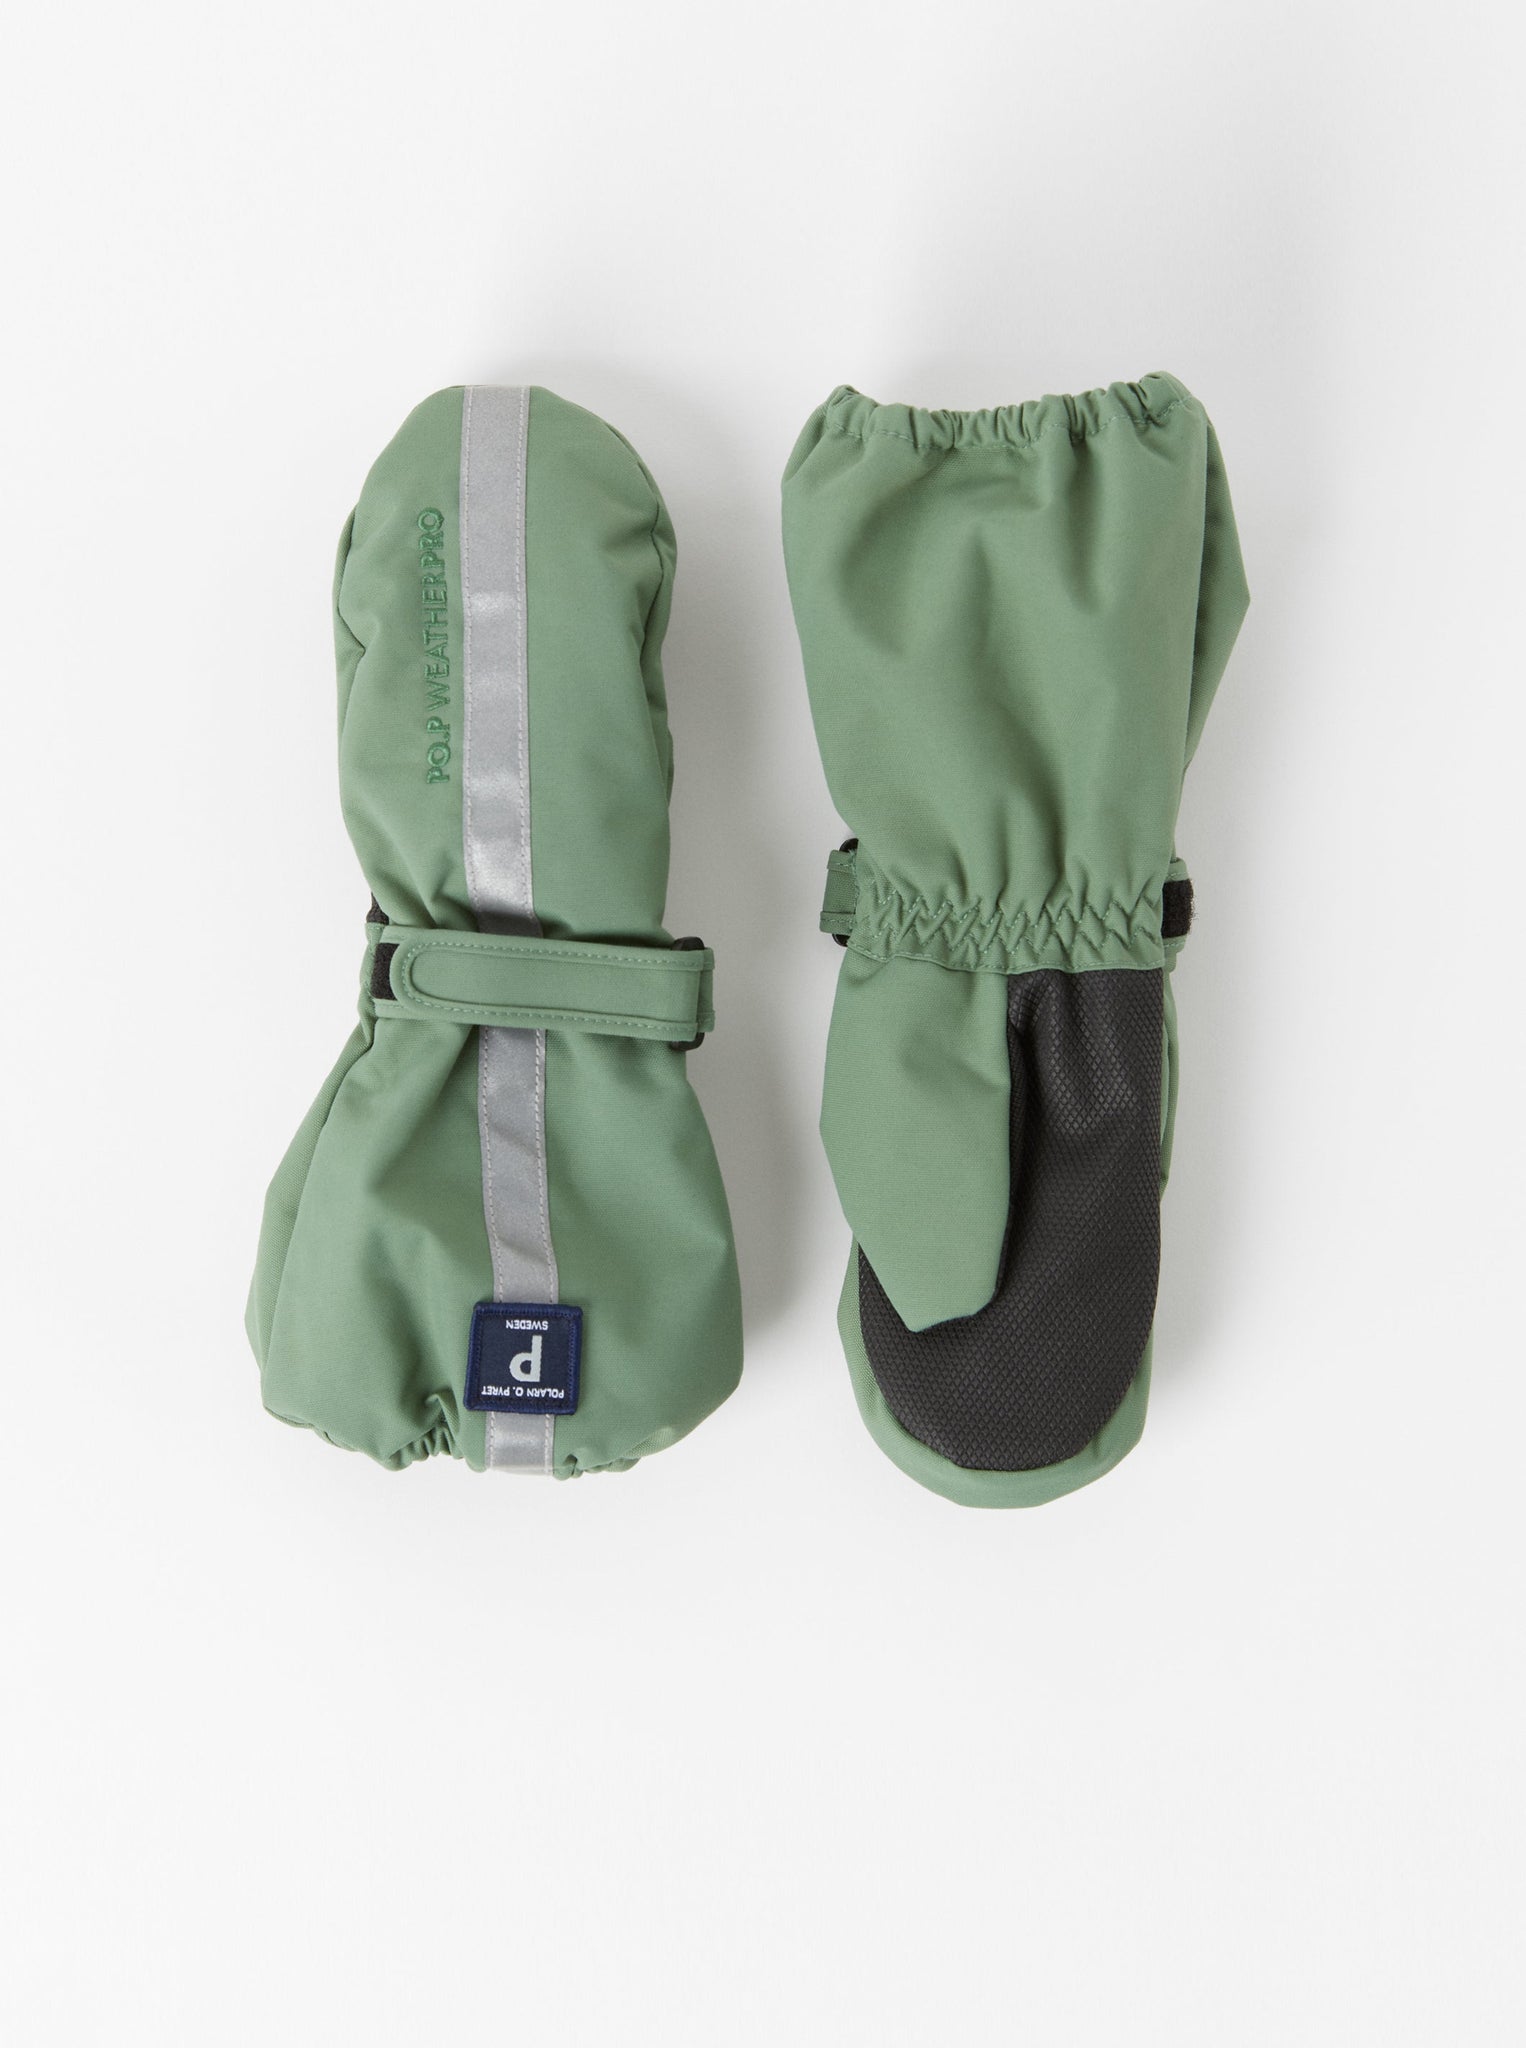 Green Padded Kids Waterproof Mittens from the Polarn O. Pyret kidswear collection. Ethically produced outerwear.